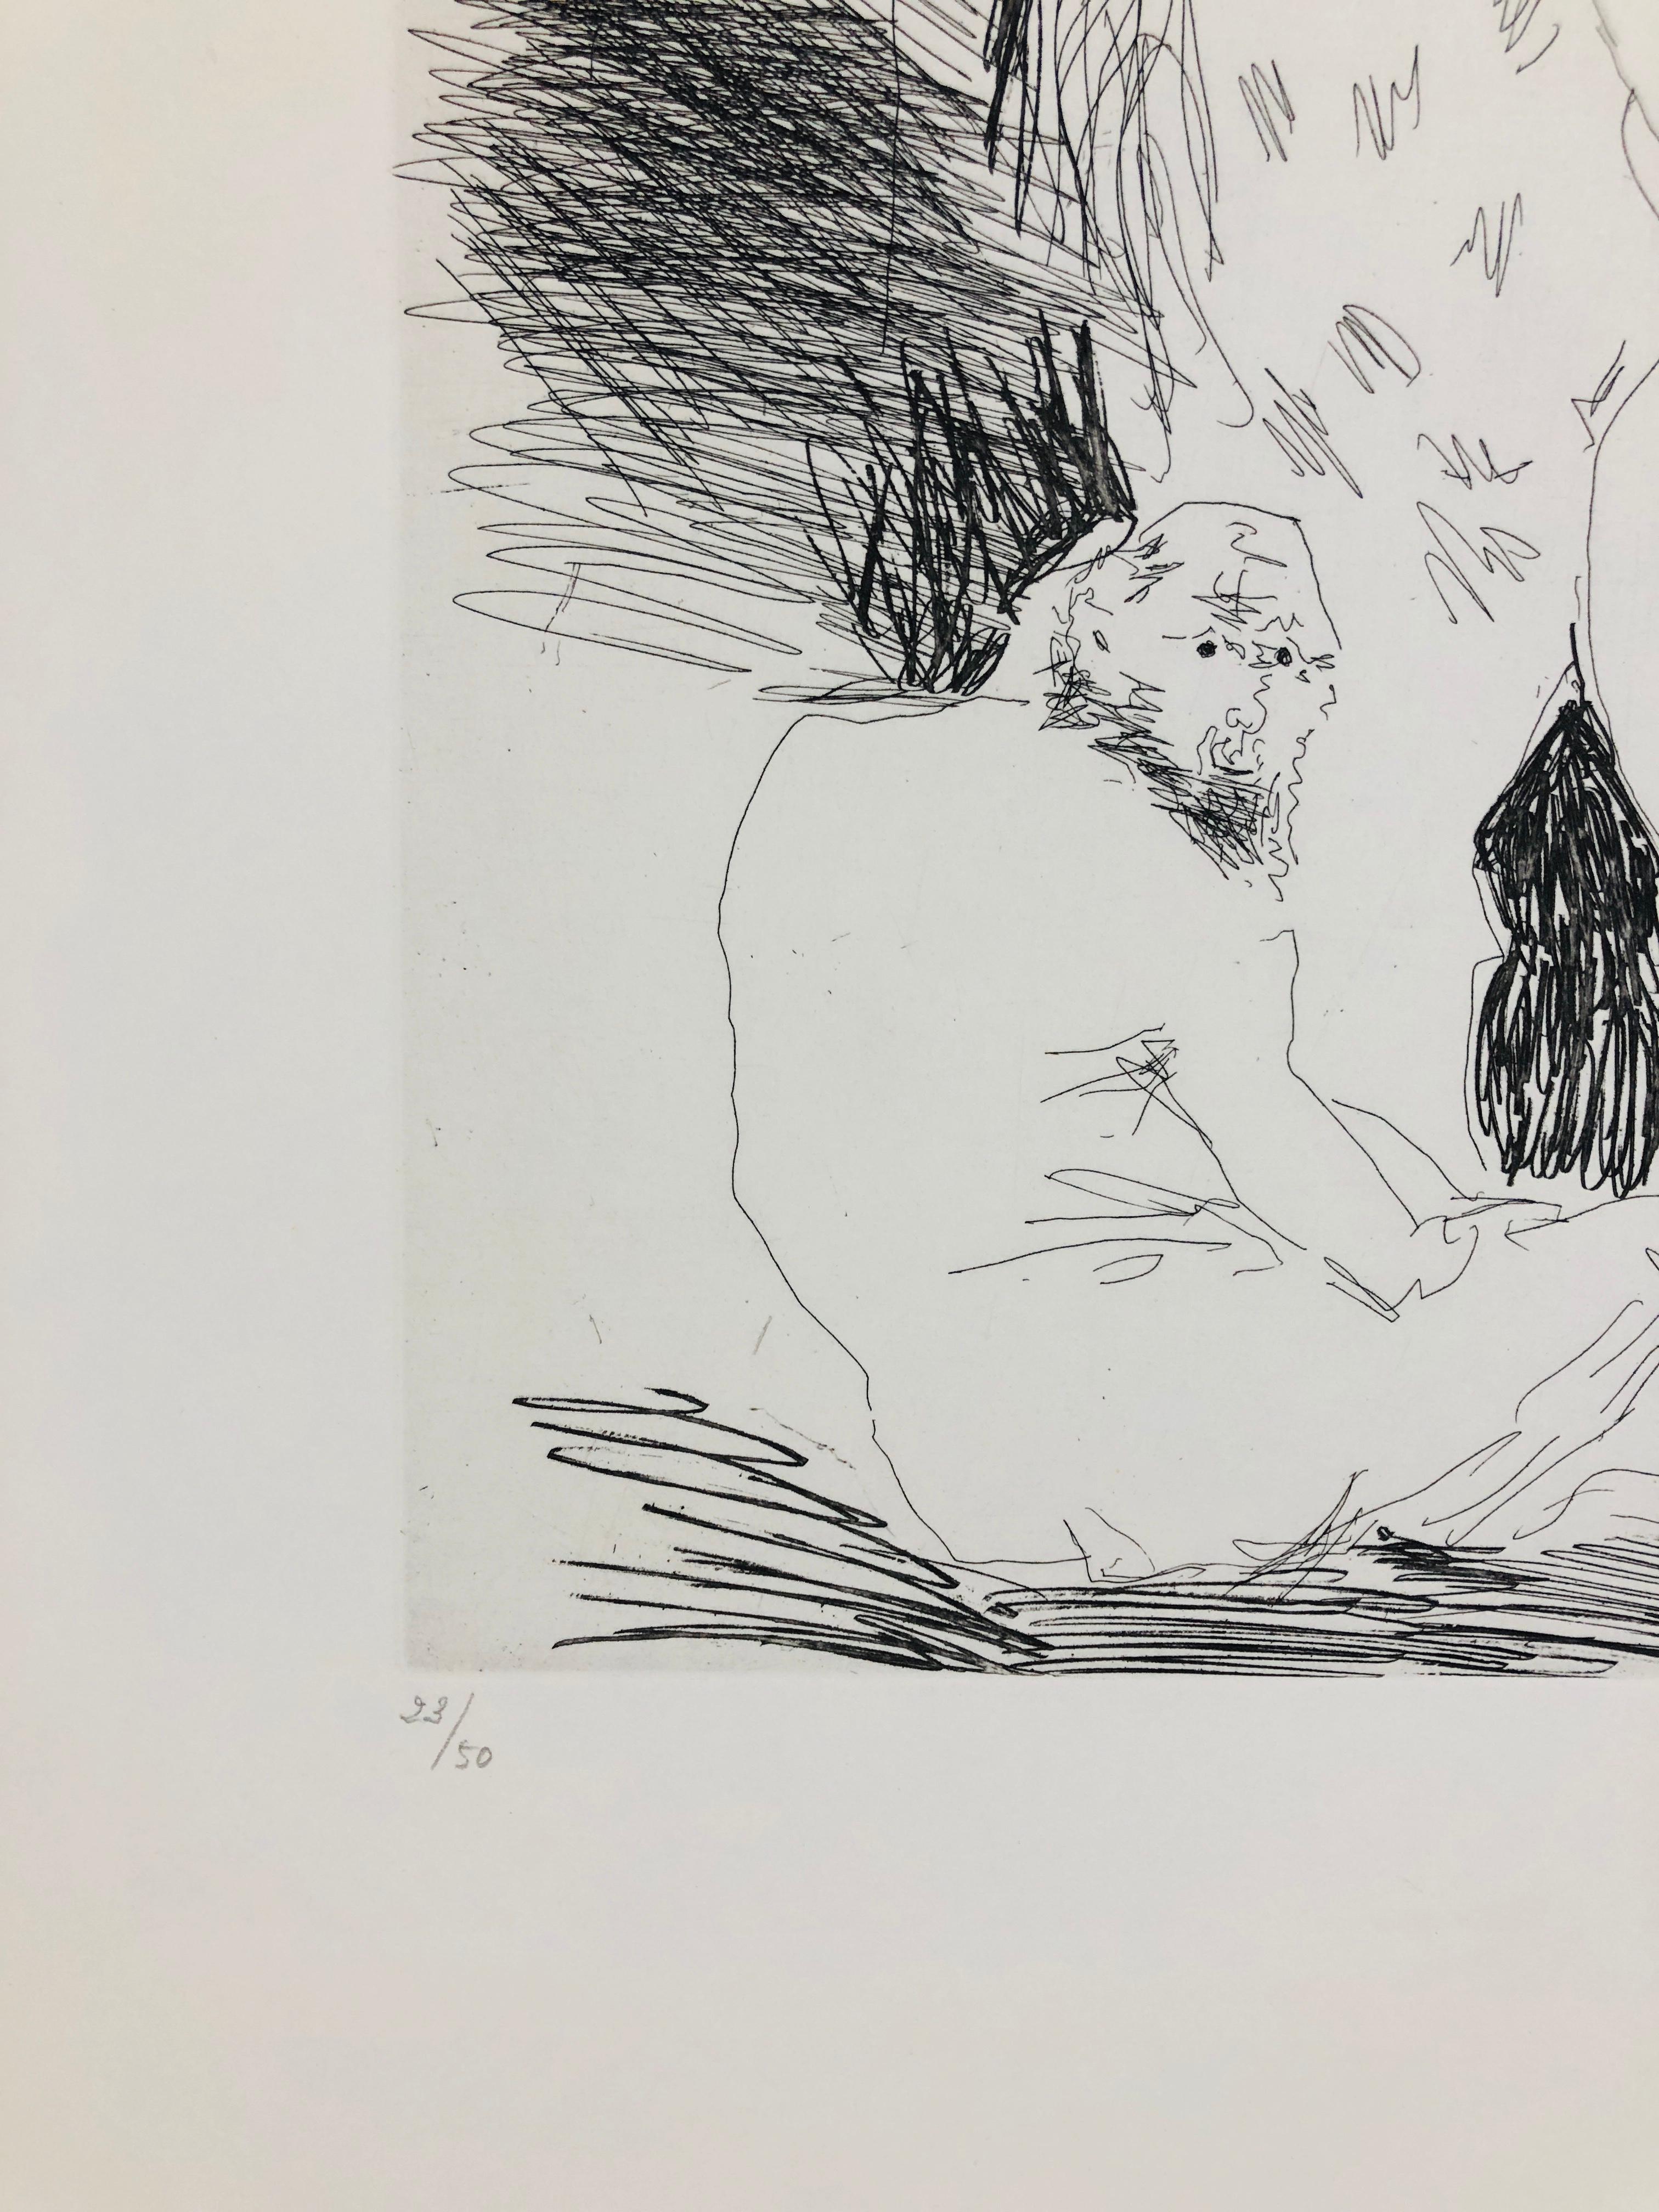 This piece is an original etching by Pablo Picasso, done in 1968. It was created for Picasso's series entitled 347 Series, which consists of 347 original works. This piece is hand signed and numbered from the edition of 50, plus 15 proofs.  It is